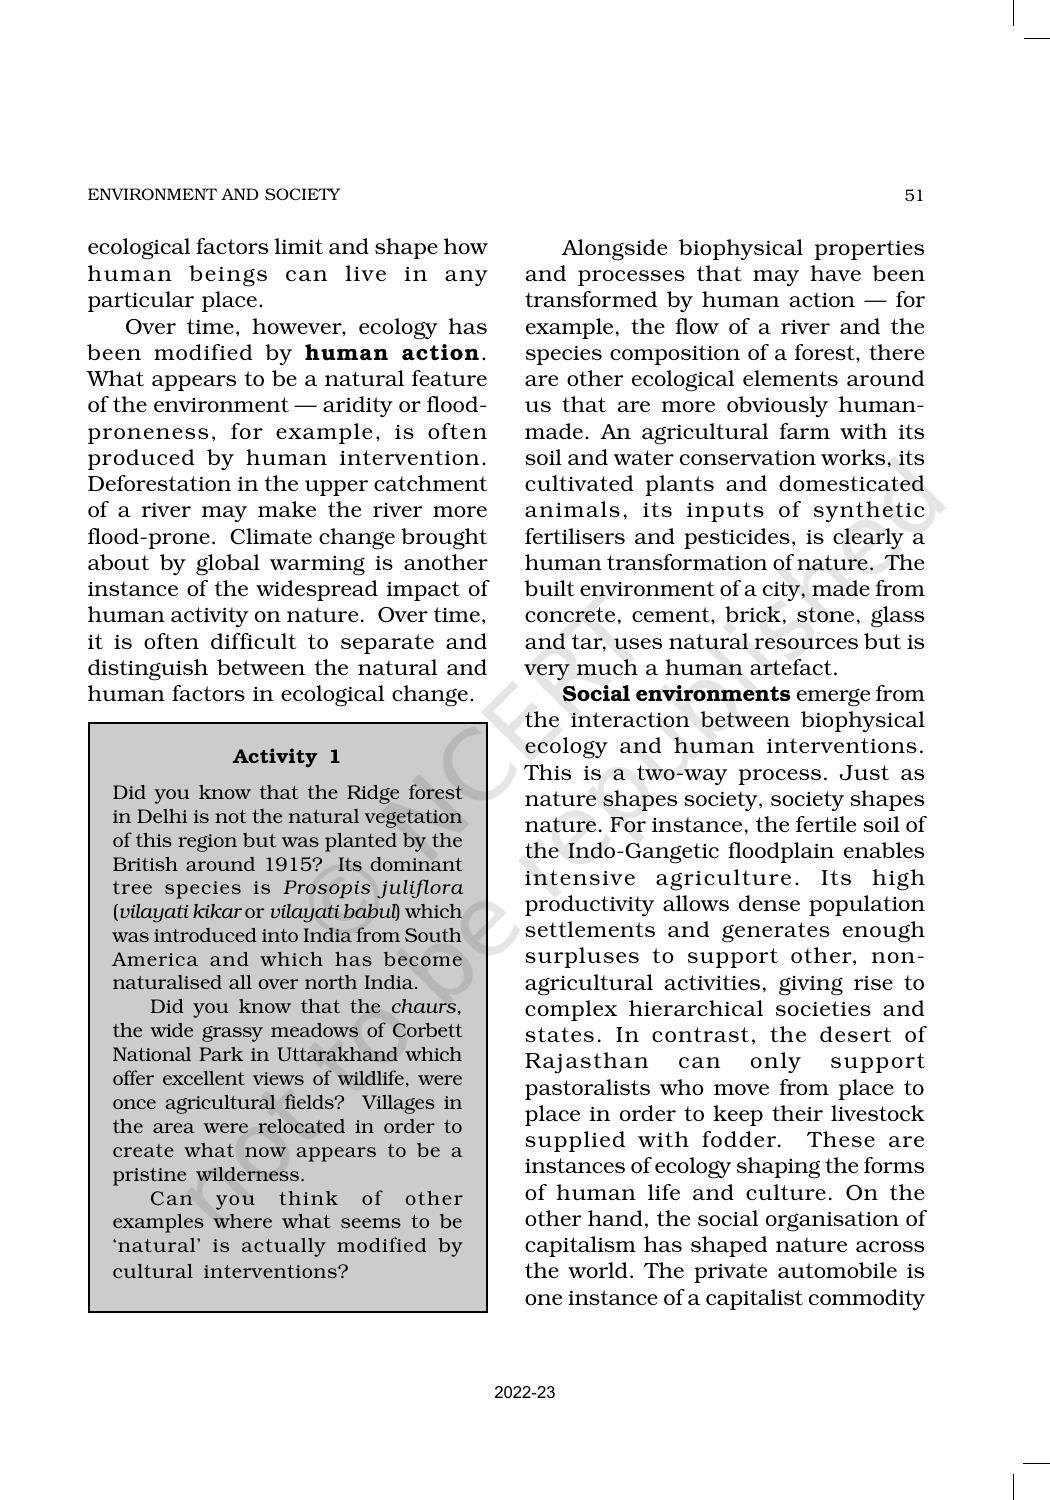 NCERT Book for Class 11 Sociology (Part-II) Chapter 3 Environment and Society - Page 2